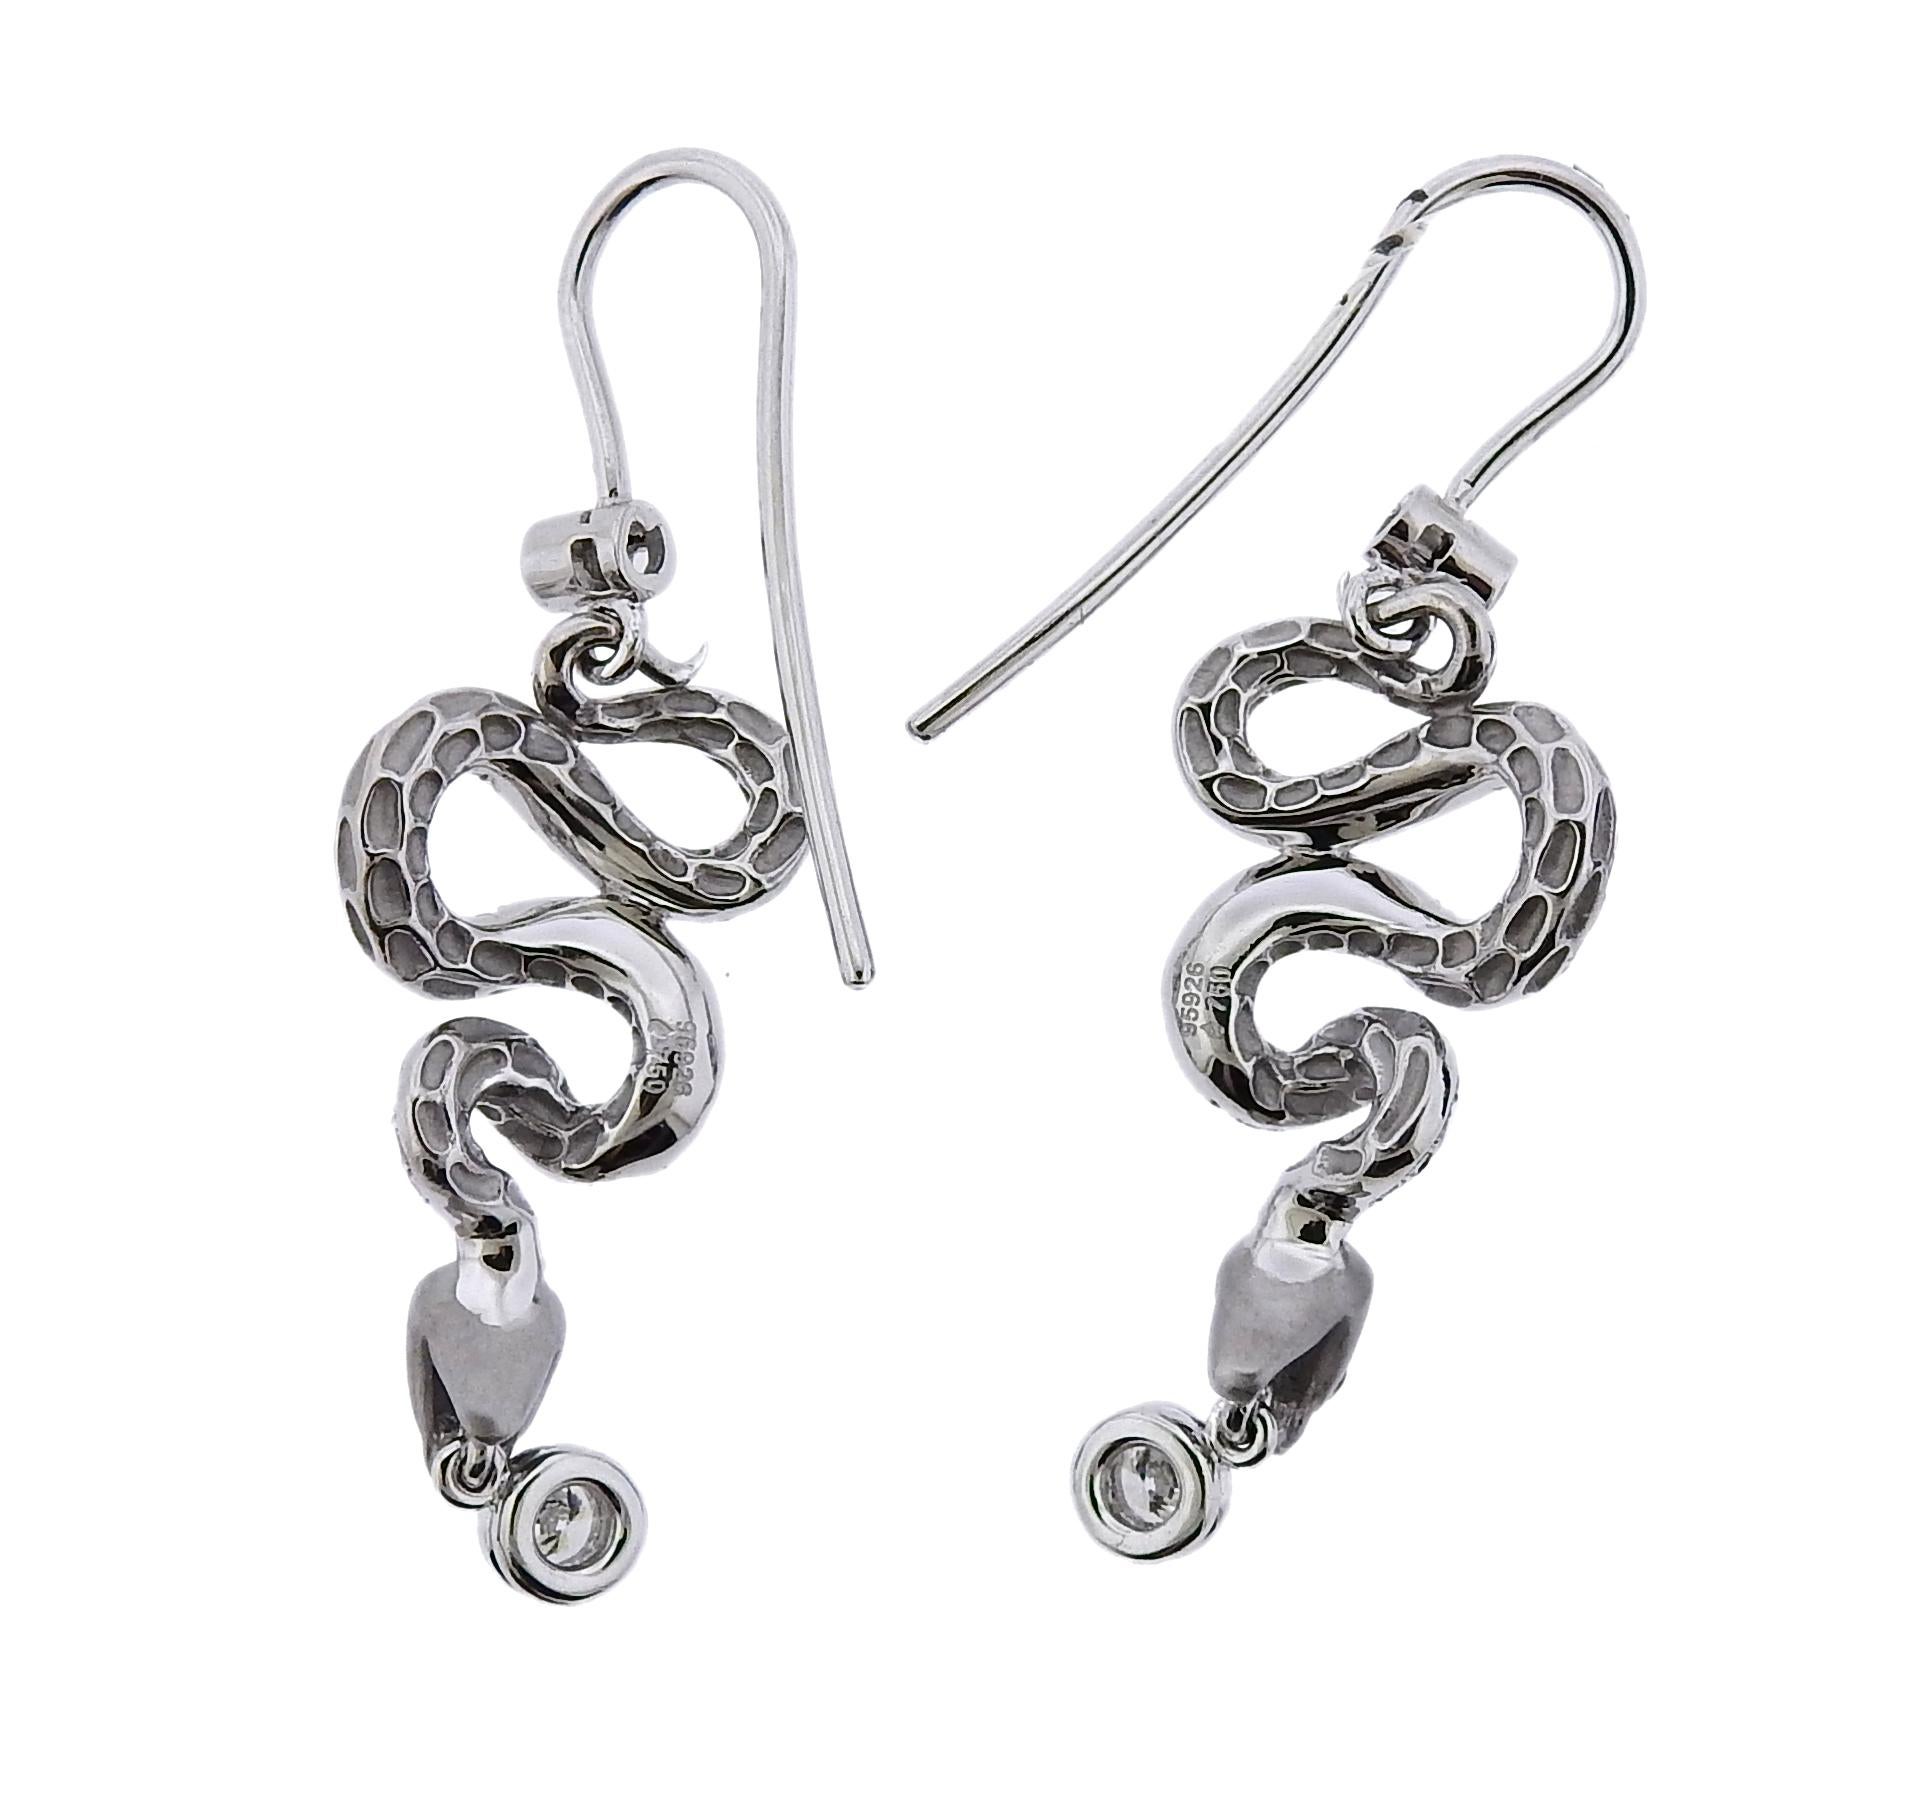 Brand new pair of 18k white gold snake earrings by Magerit, set with approx. 0.82ctw in G/VS diamonds.  Retail $7400. Comes with box and COA.  
 Earrings measure 45mm x 14mm. Weight: 9.7 grams.Marked:  95926, 750, Maker's mark.